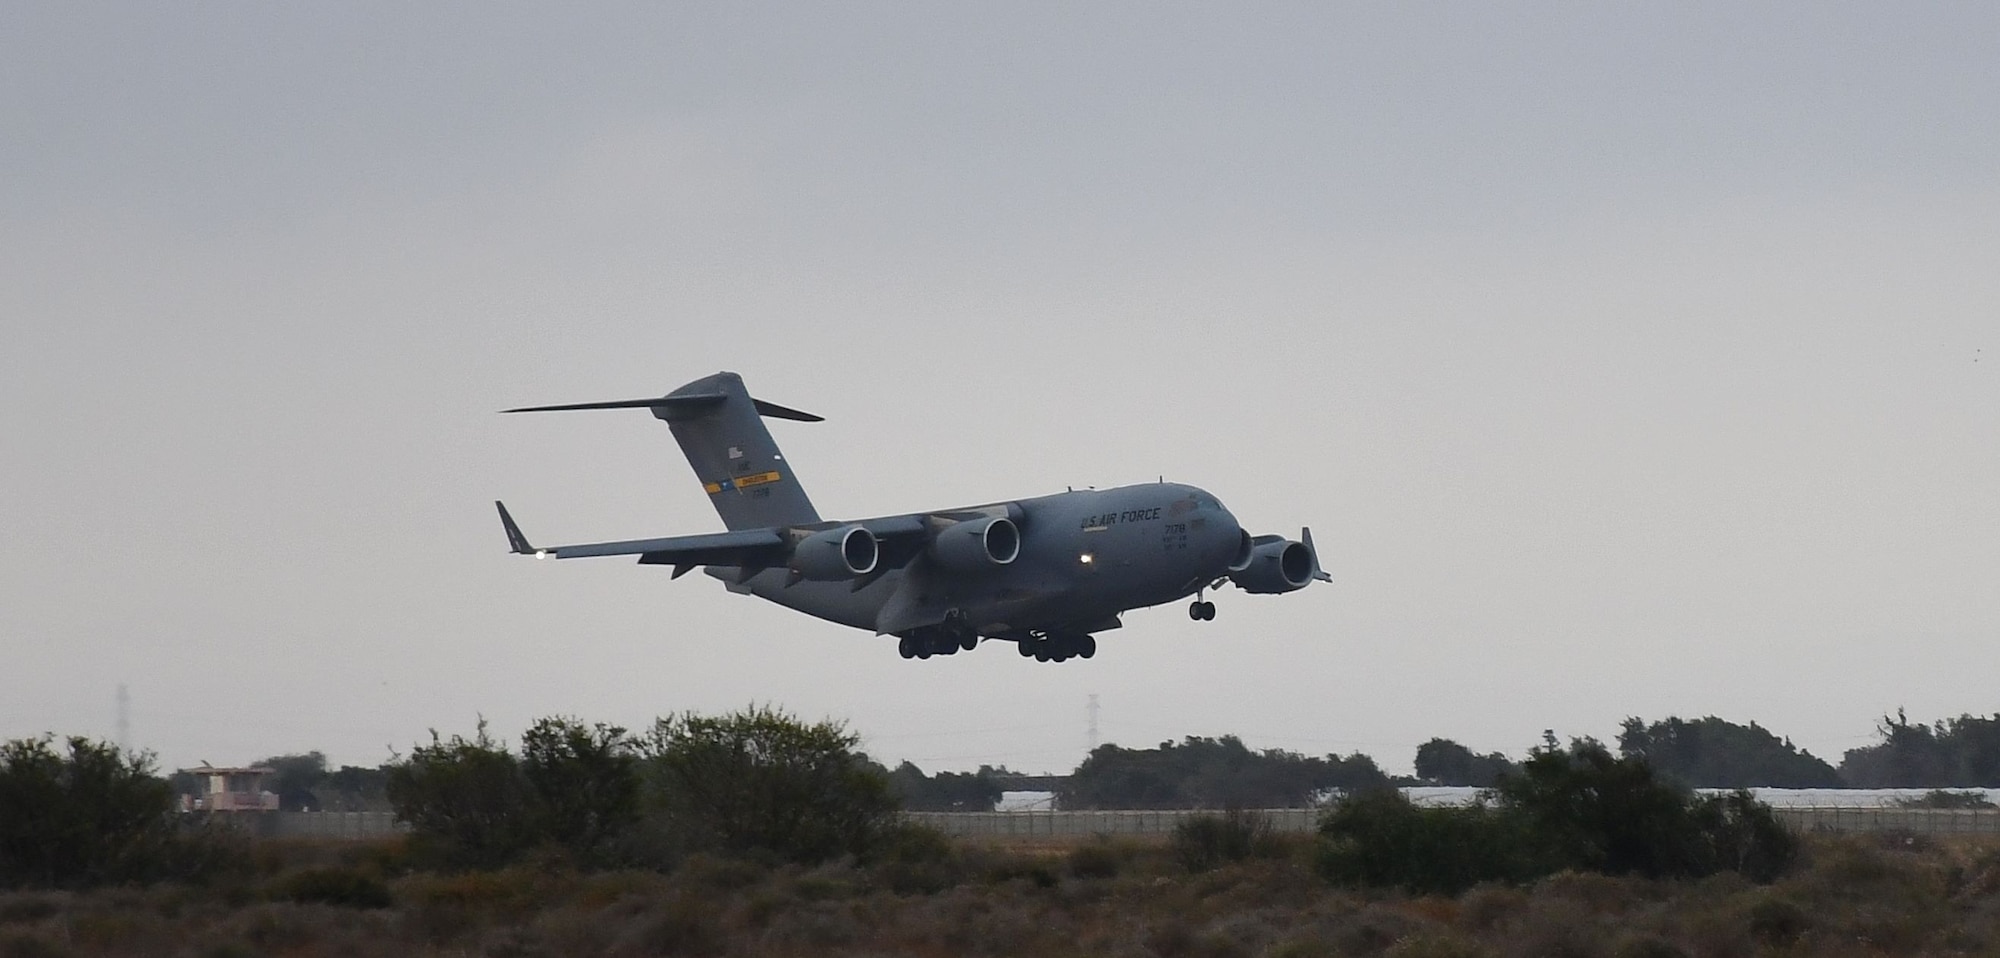 A U.S. Air Force C-17 Globemaster III lands at Agadir-Al Massara International Airport, Agadir, Morocco, May 17, 2024. The C-17 was transporting two AH-64 Apache attack helicopters from 1st Battalion, 211th Aviation Regiment, Utah National Guard, in preparation for African Lion 2024. This year marks the 20th anniversary of U.S. Africa Command’s premier joint exercise led by U.S. Army Southern European Task Force, Africa (SETAF-AF), running from April 19 to May 31 across Ghana, Morocco, Senegal and Tunisia, with over 8,100 participants from 27 nations and NATO contingents. (U.S. Army photo by Maj. Alun Thomas)